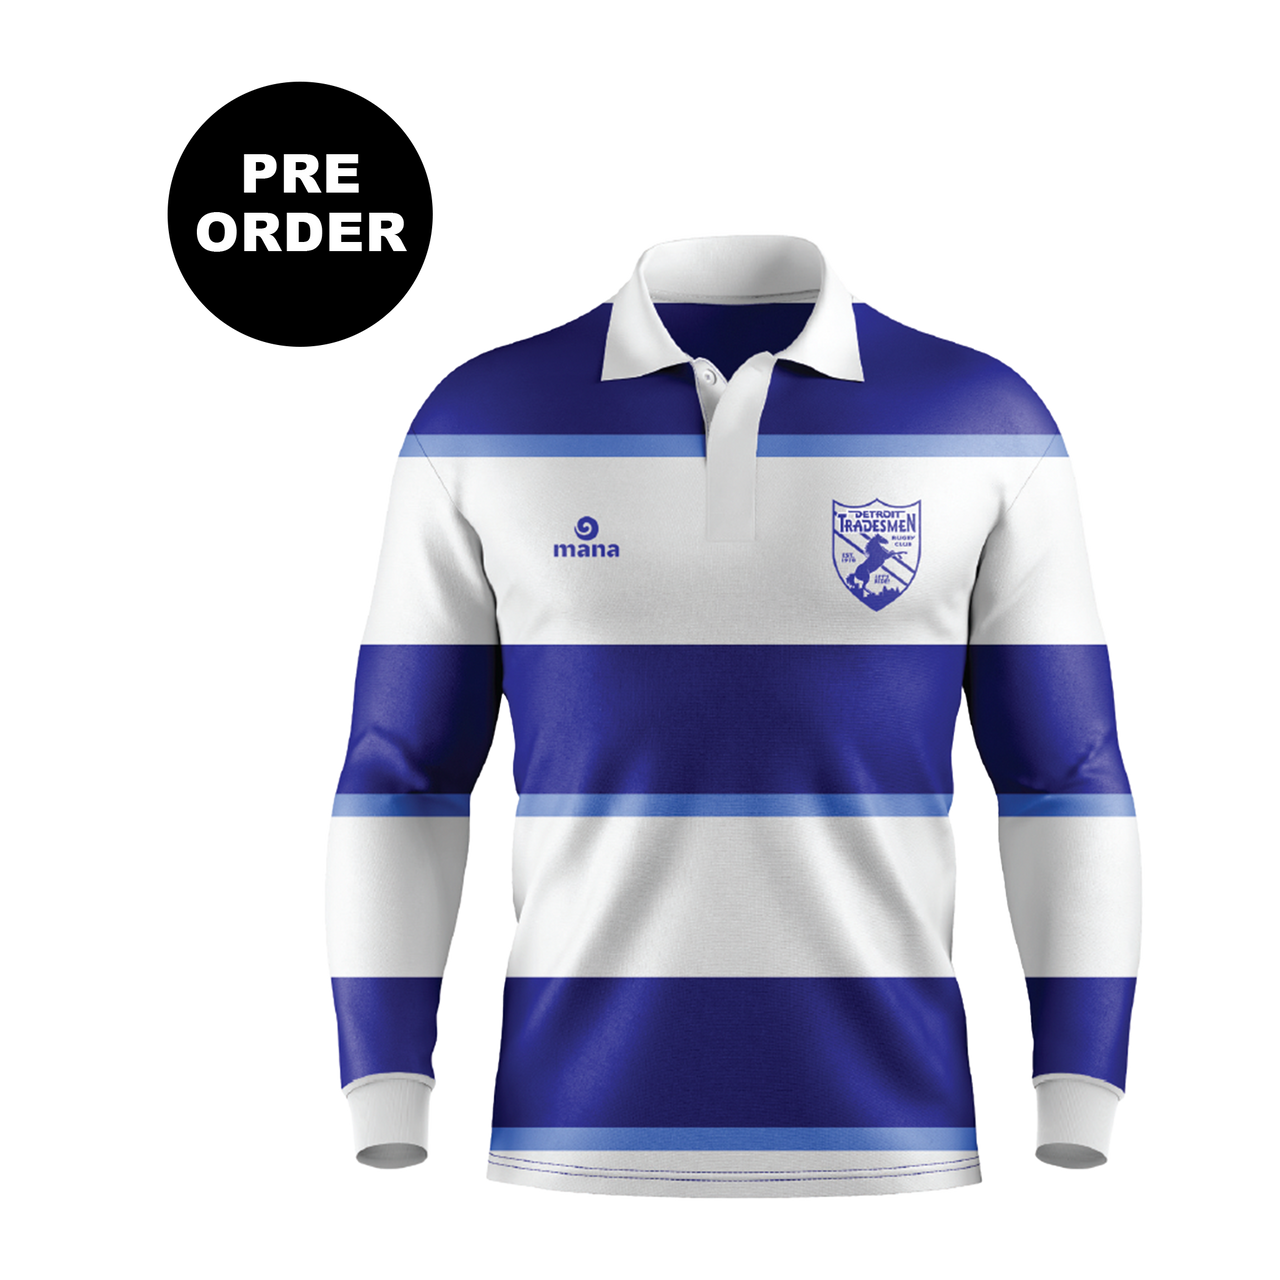 Detroit Tradesmen Classic Rugby Jersey